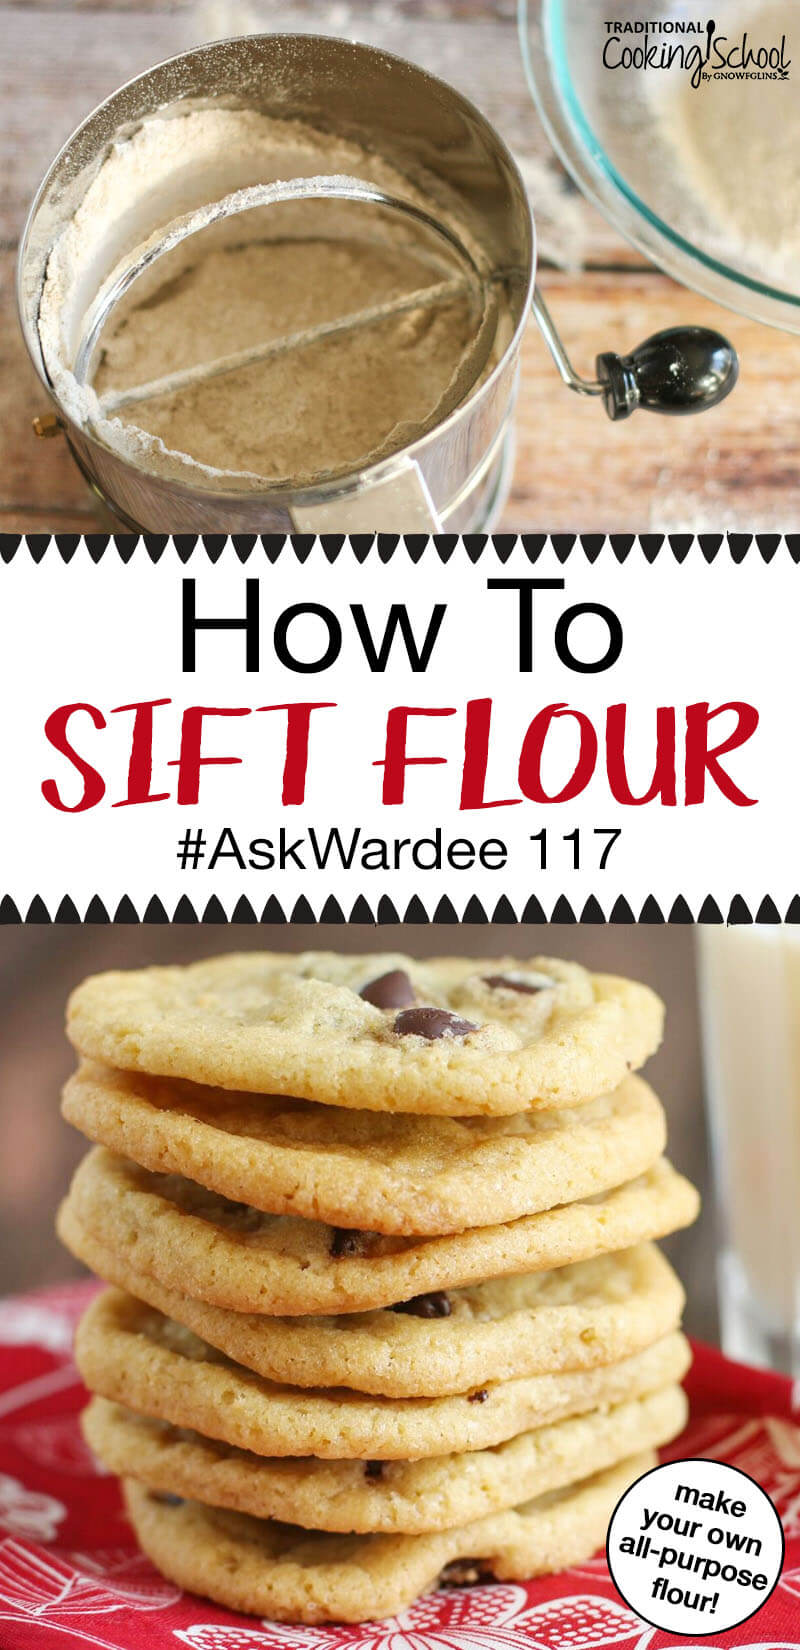 photo collage of how to make all-purpose flour for light and fluffy baked goods, with text overlay: "How To Sift Flour"